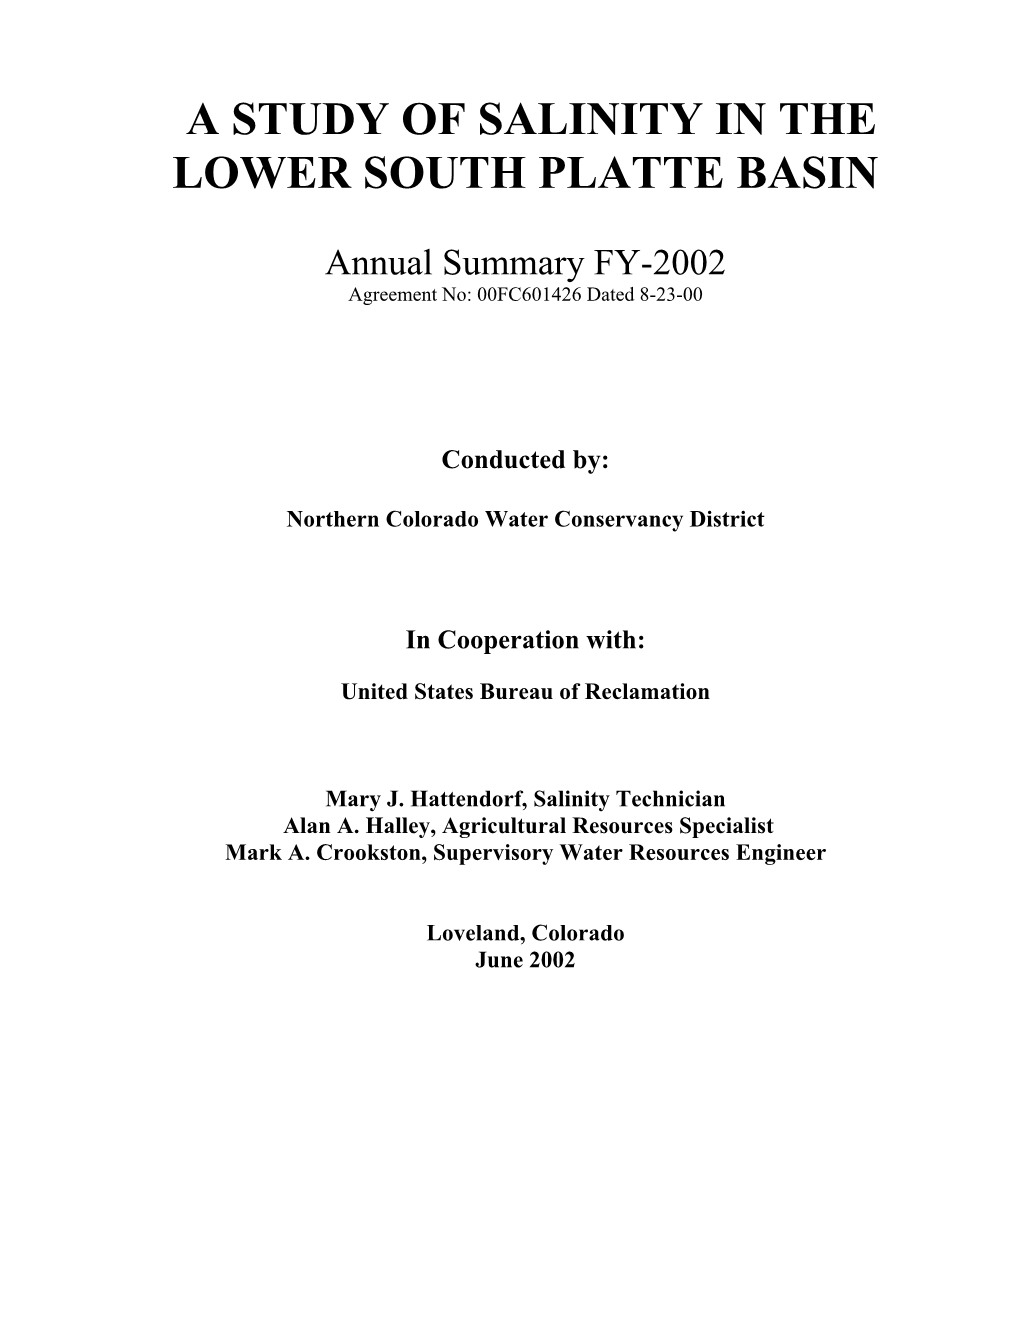 A Study of Salinity in the Lower South Platte Basin